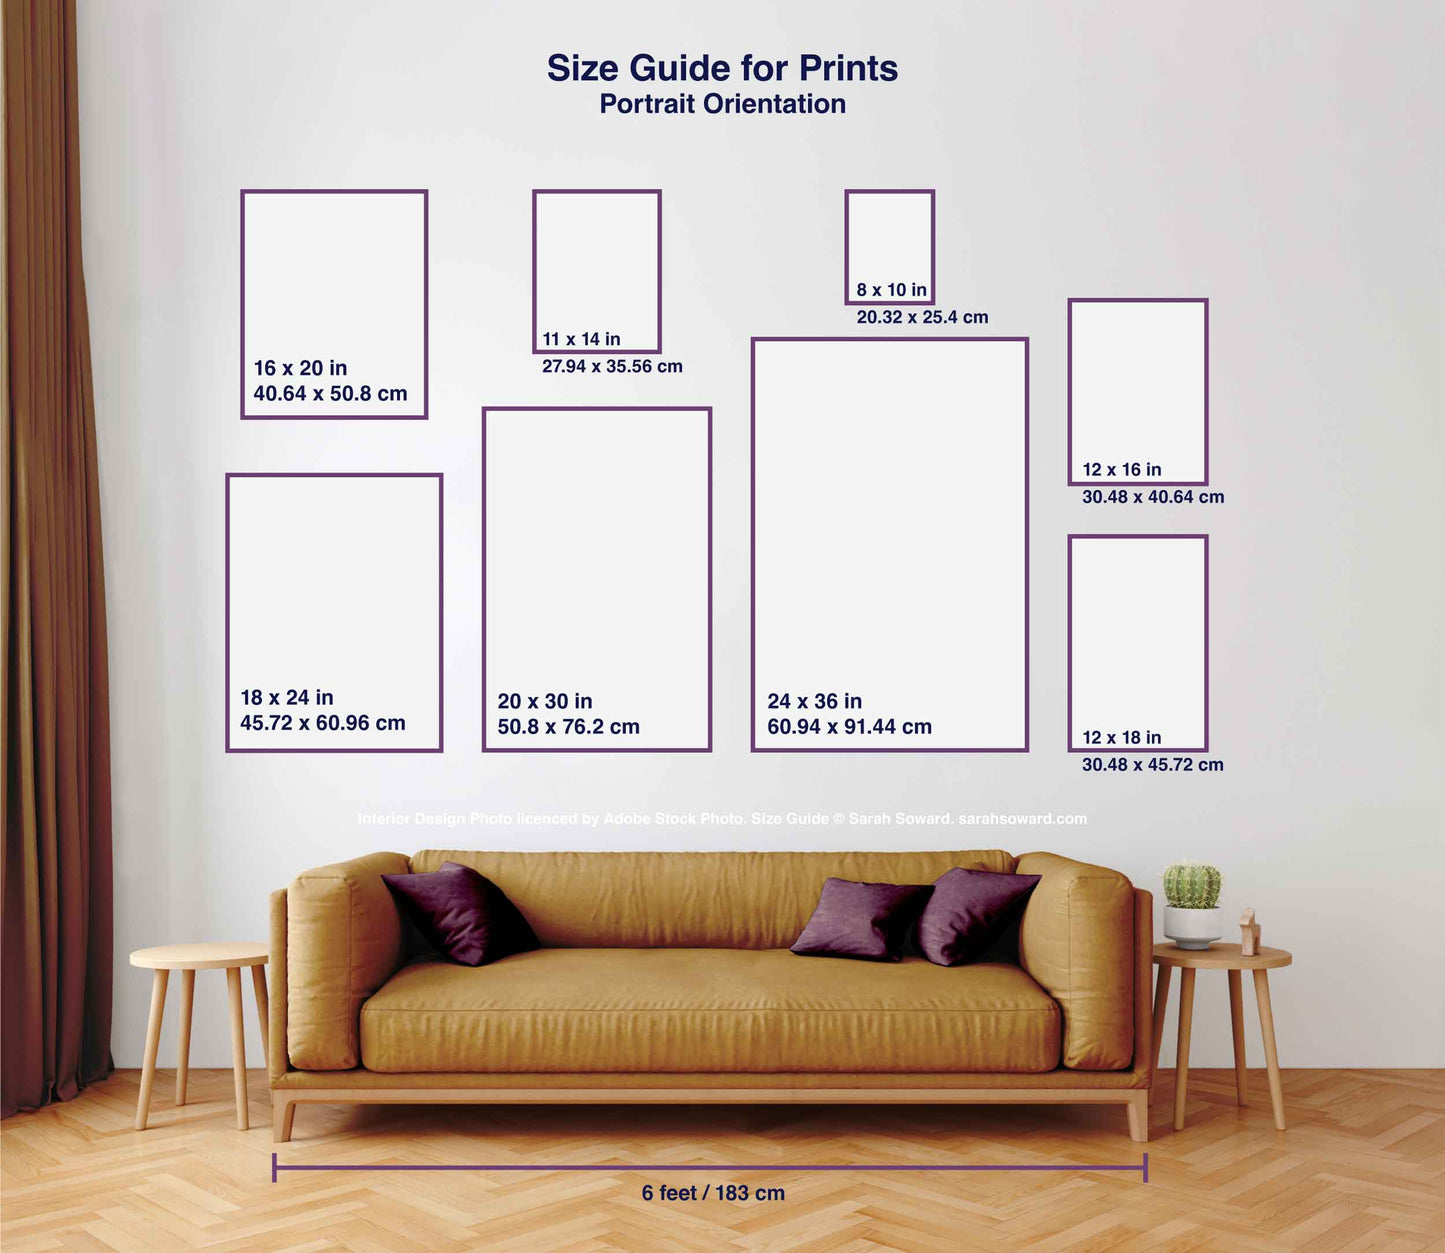 Visual size guide for different sizes of prints in a vertical, or portrait, orientation.